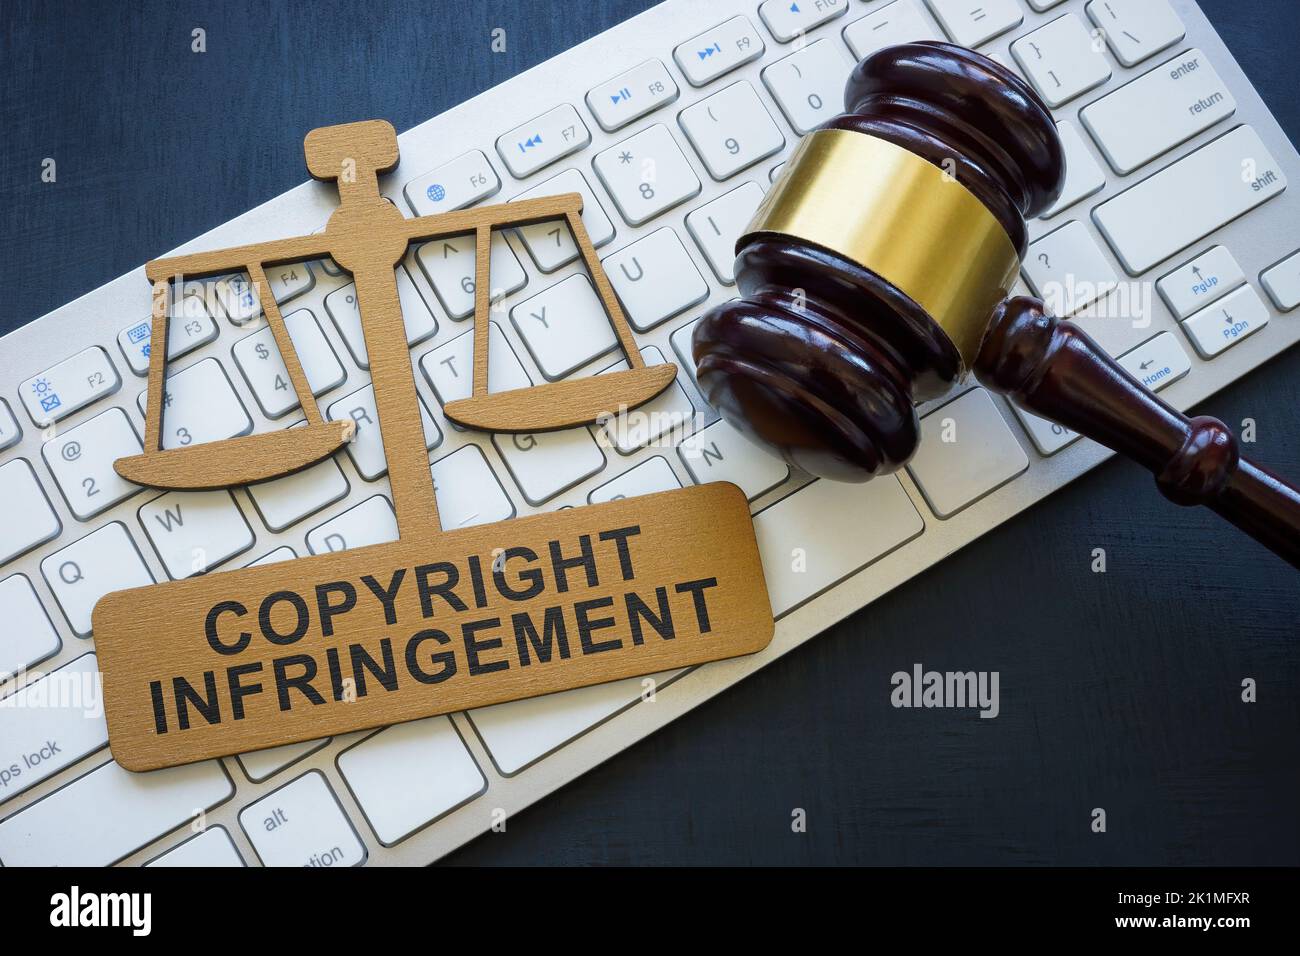 Copyright infringement phrase on the plate, keyboard and gavel. Stock Photo